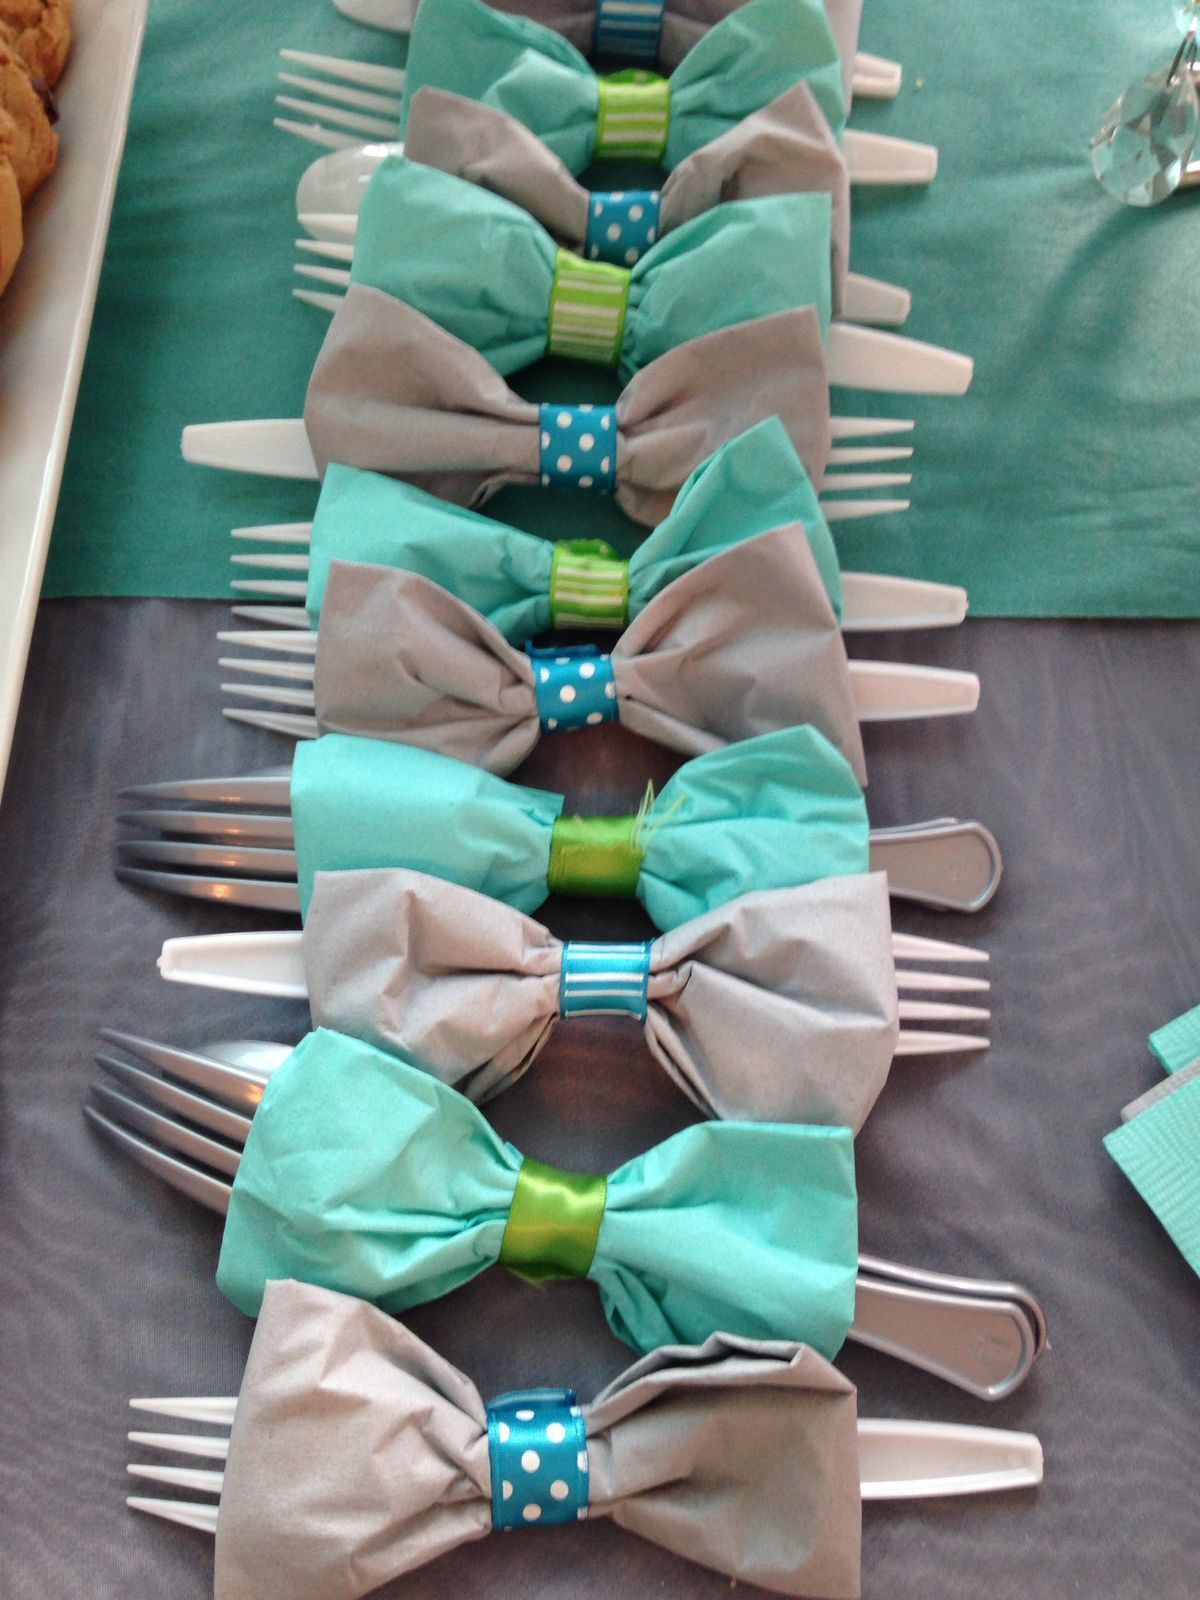 Bow tie table decorations – dress up each placesetting with a fun flatware wrap